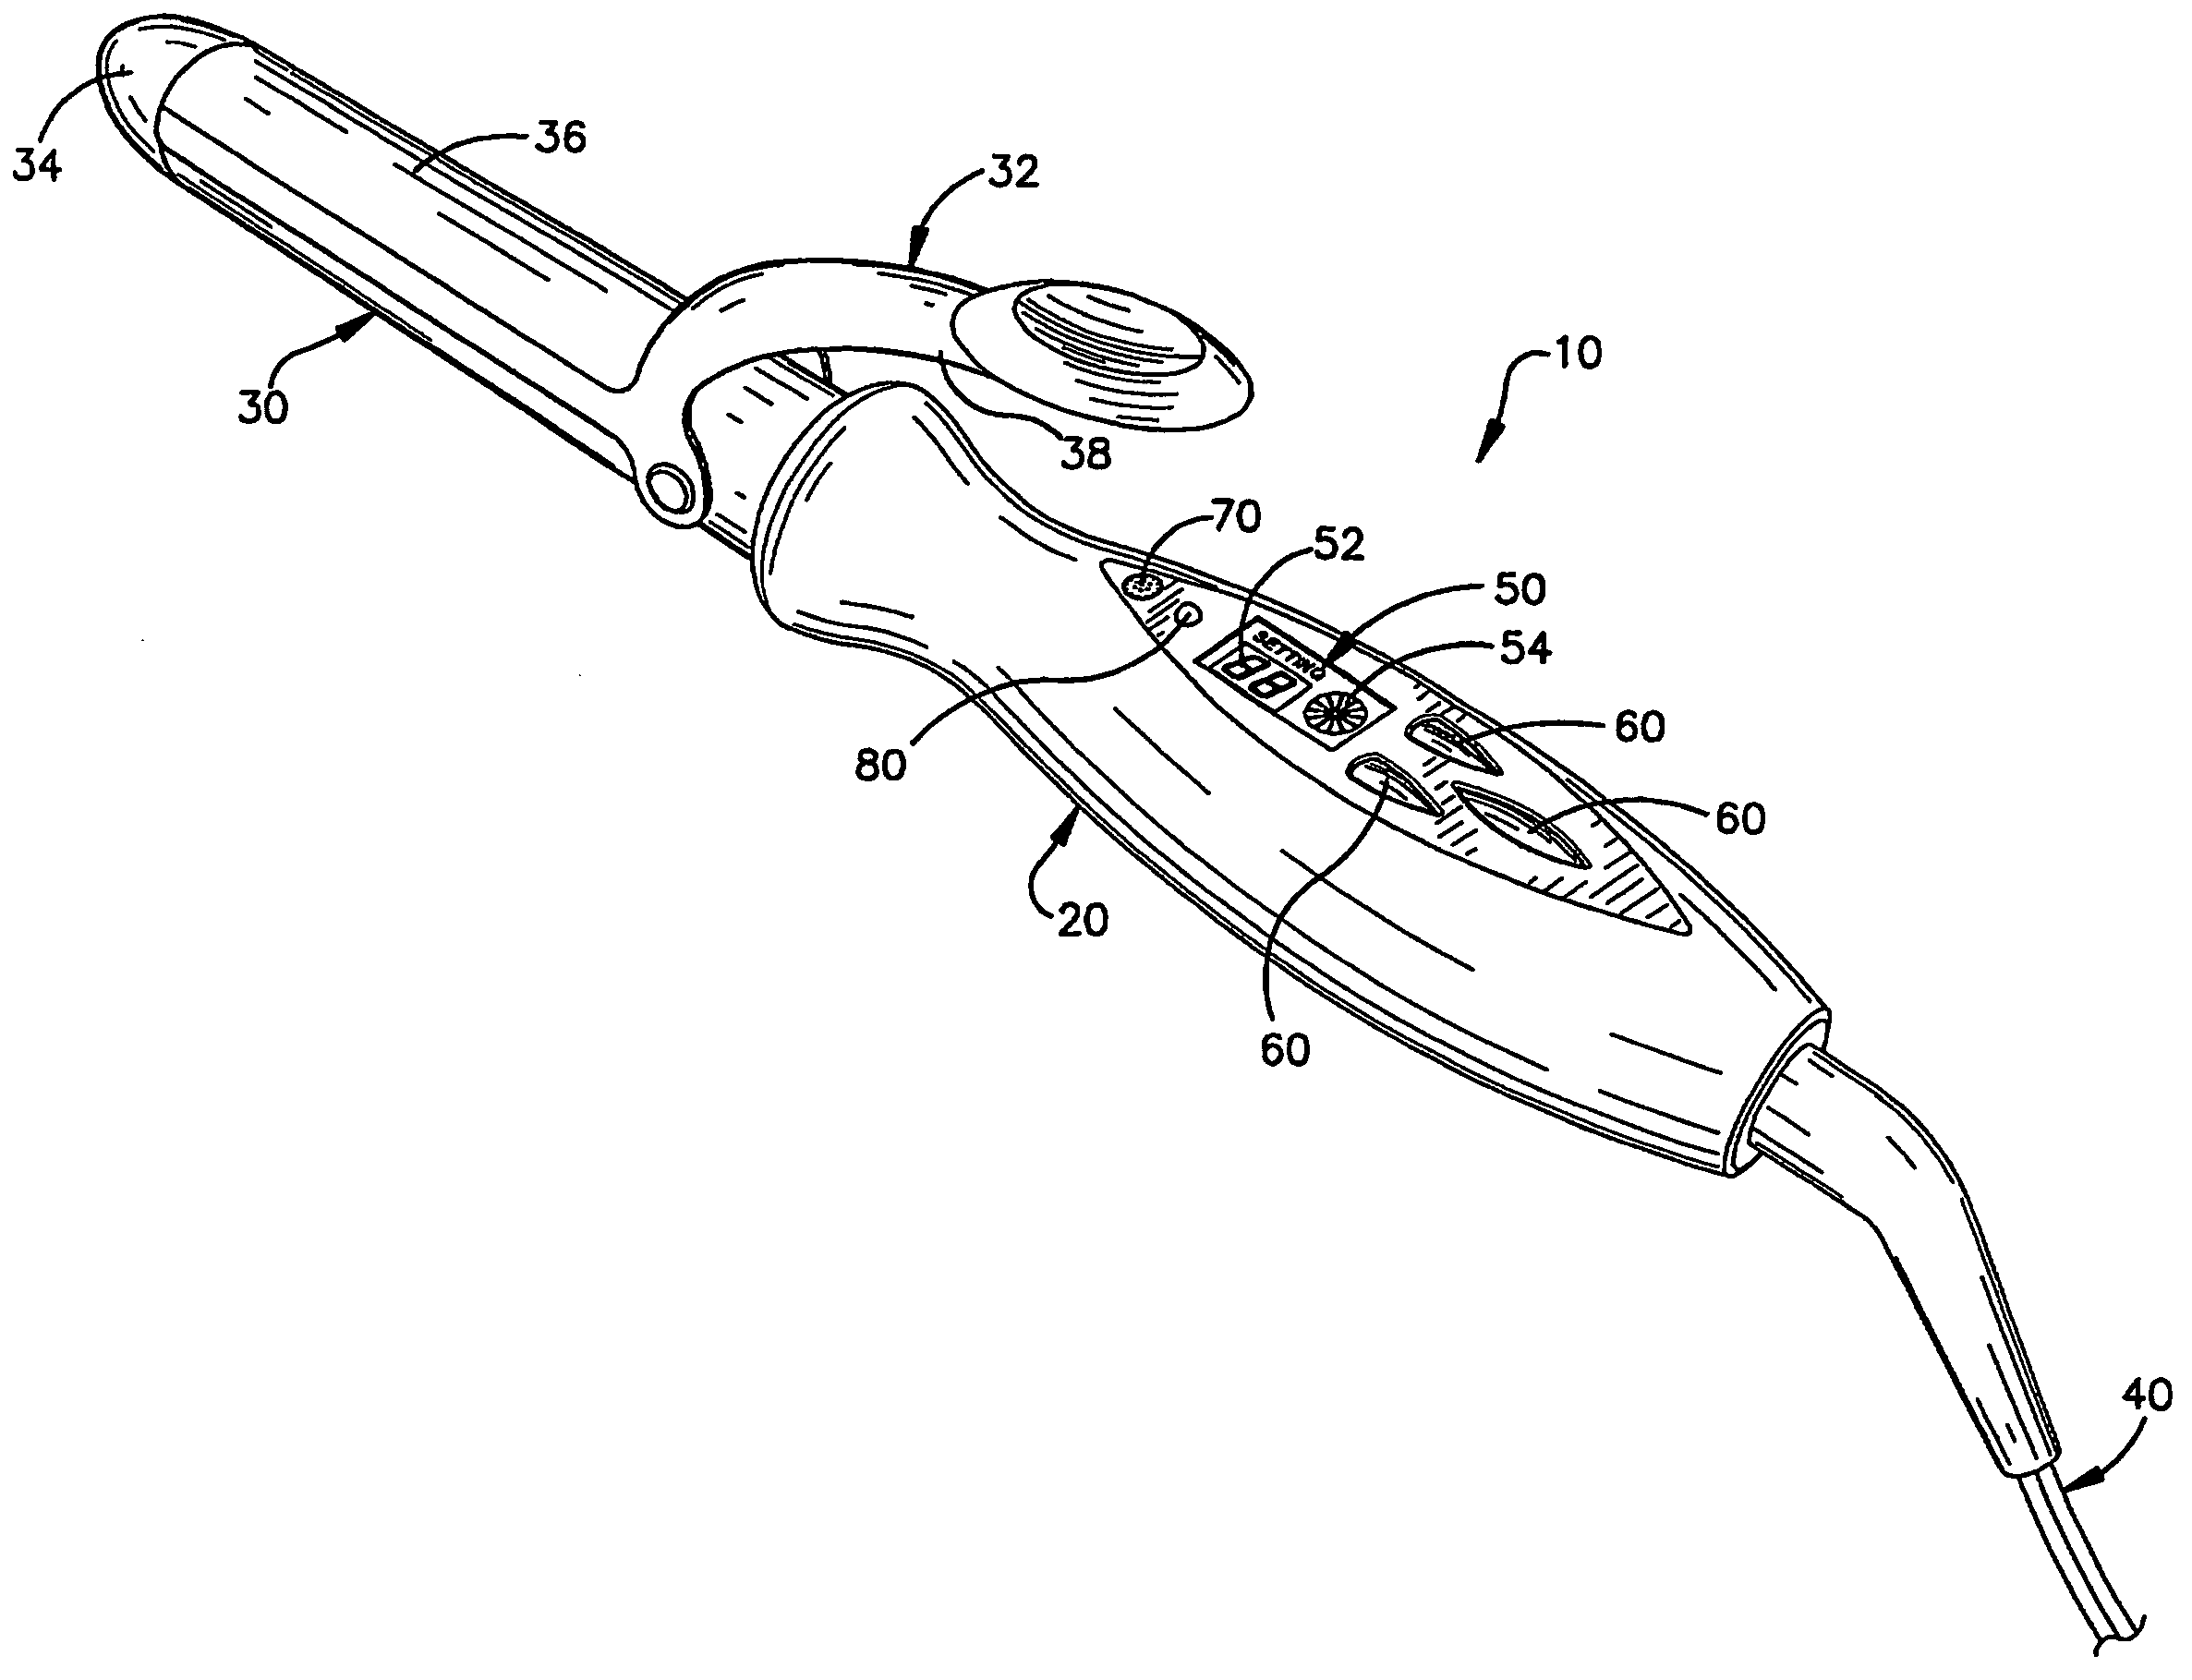 Visual user interface for hair styling apparatus